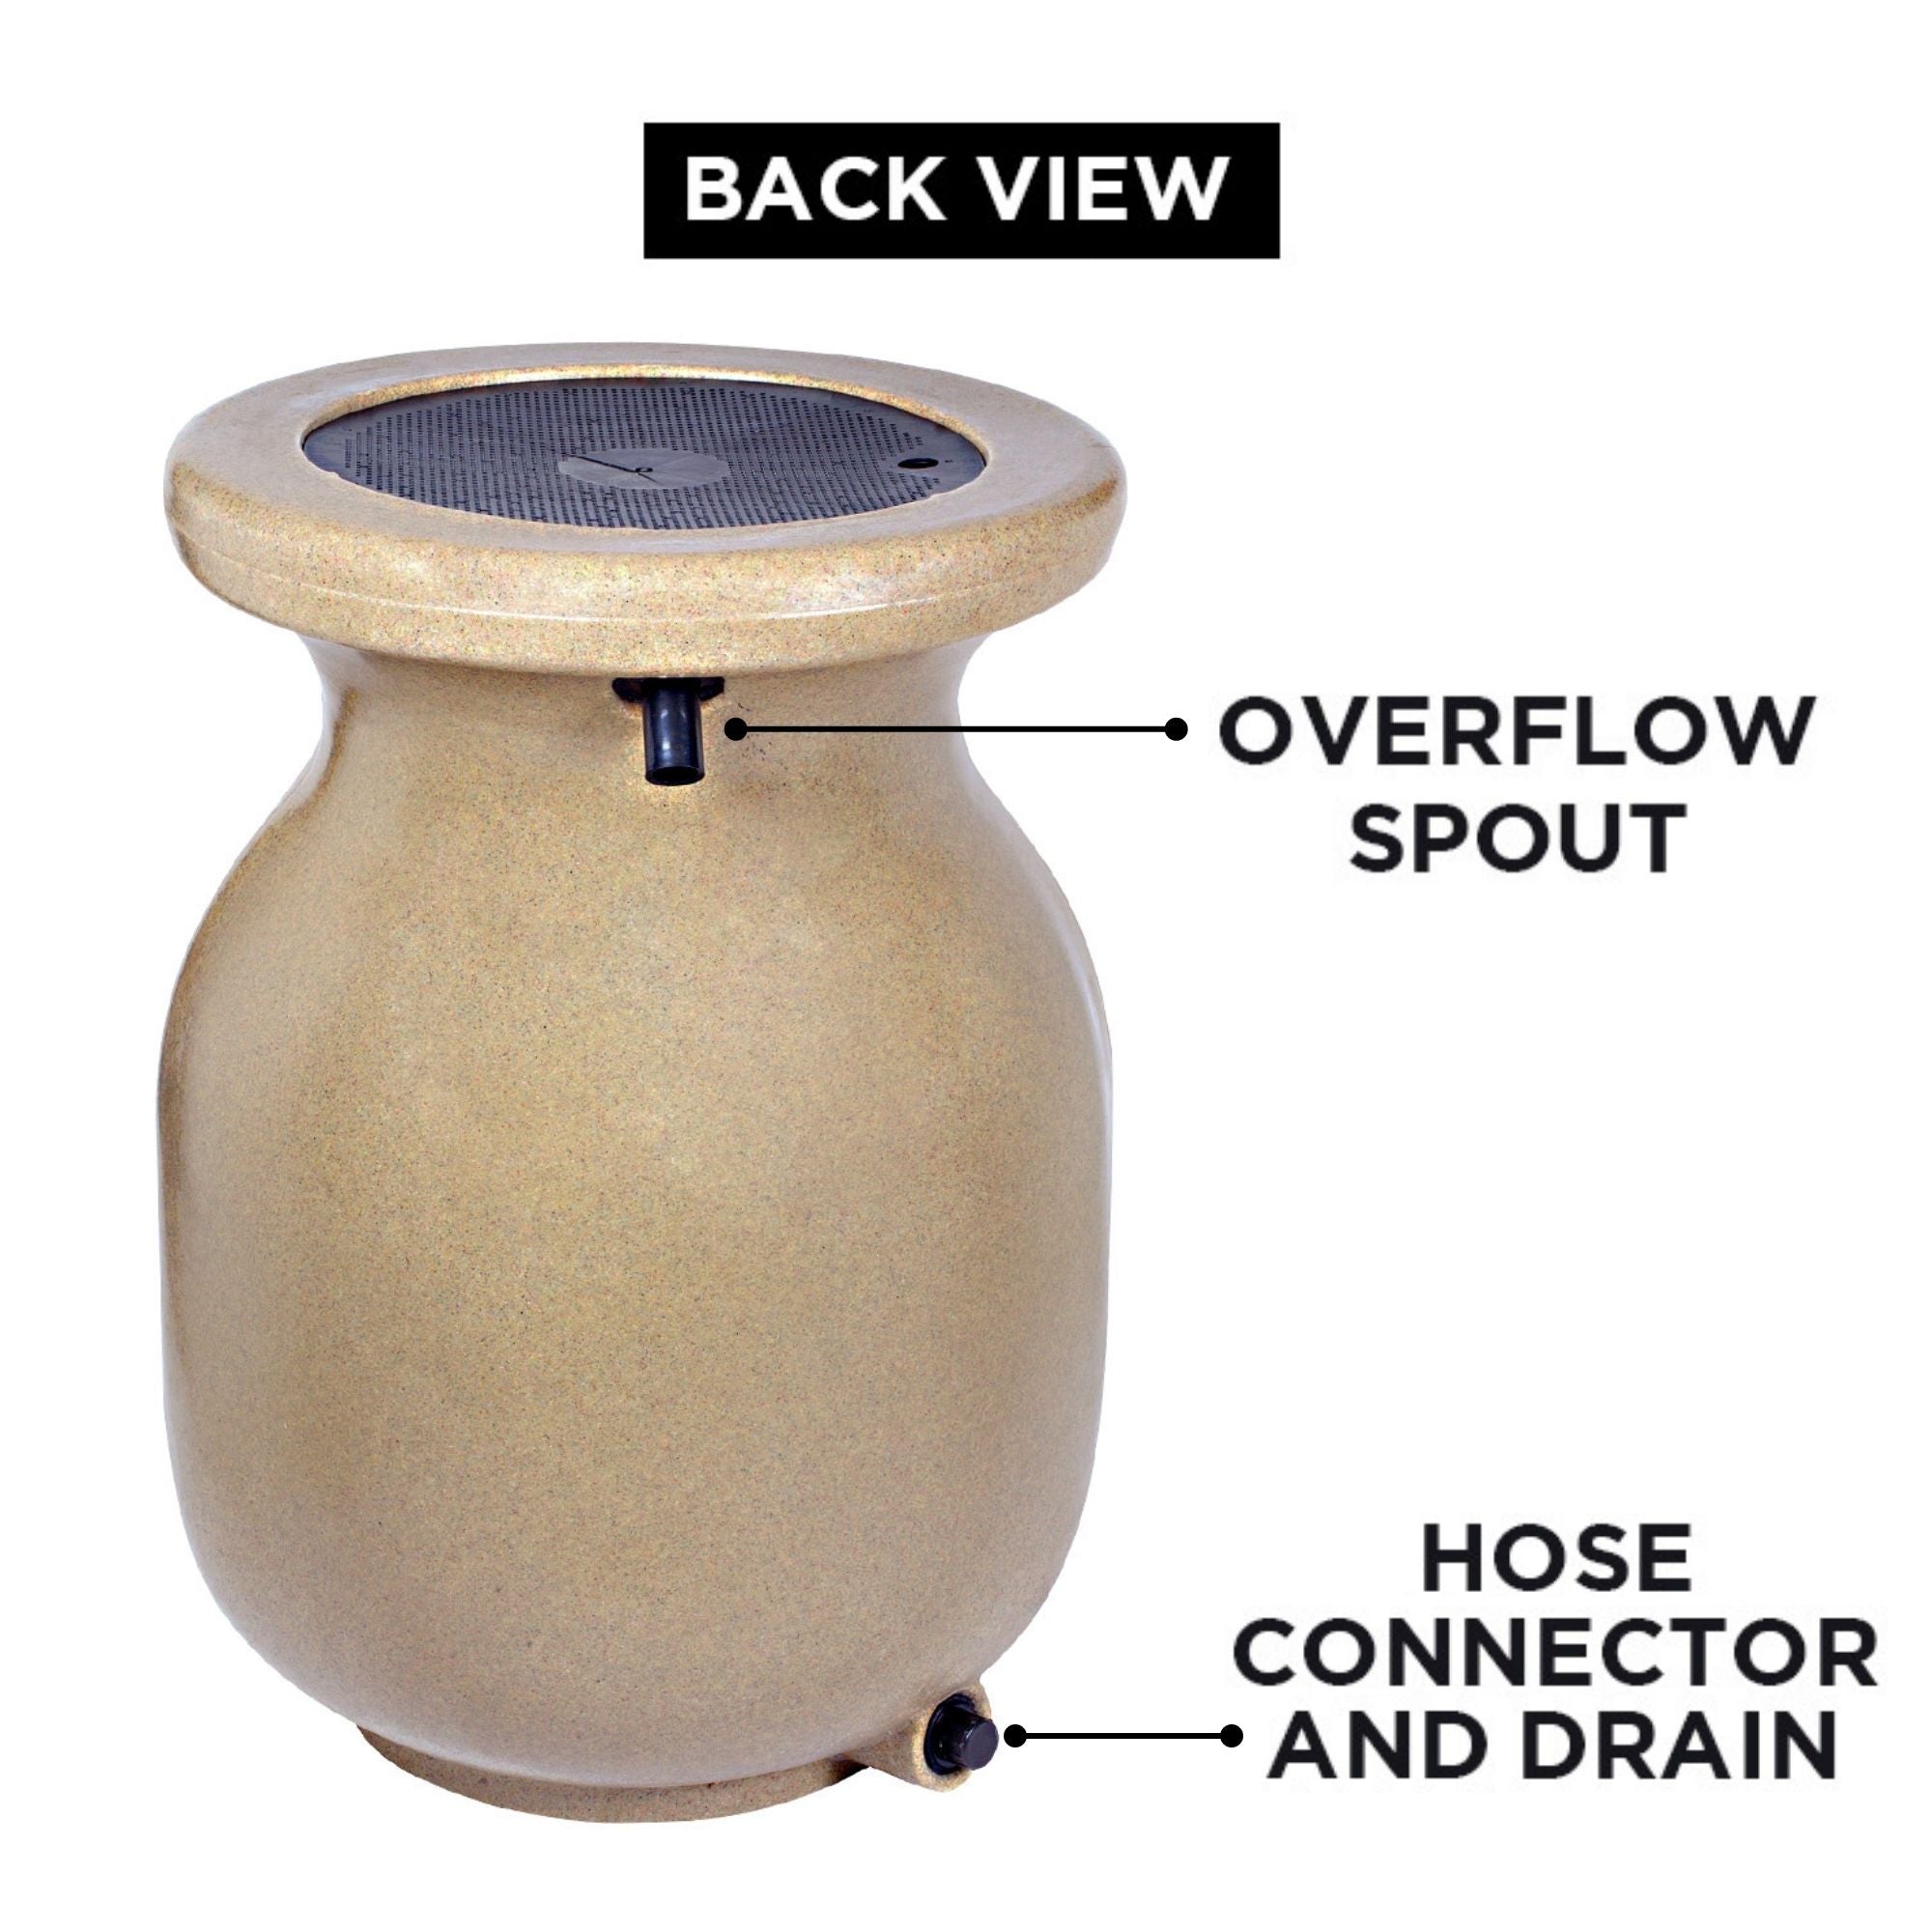 Back view product shot of stone-look beige rain barrel on a white background with parts labeled: Overflow spout; hose connector and drain